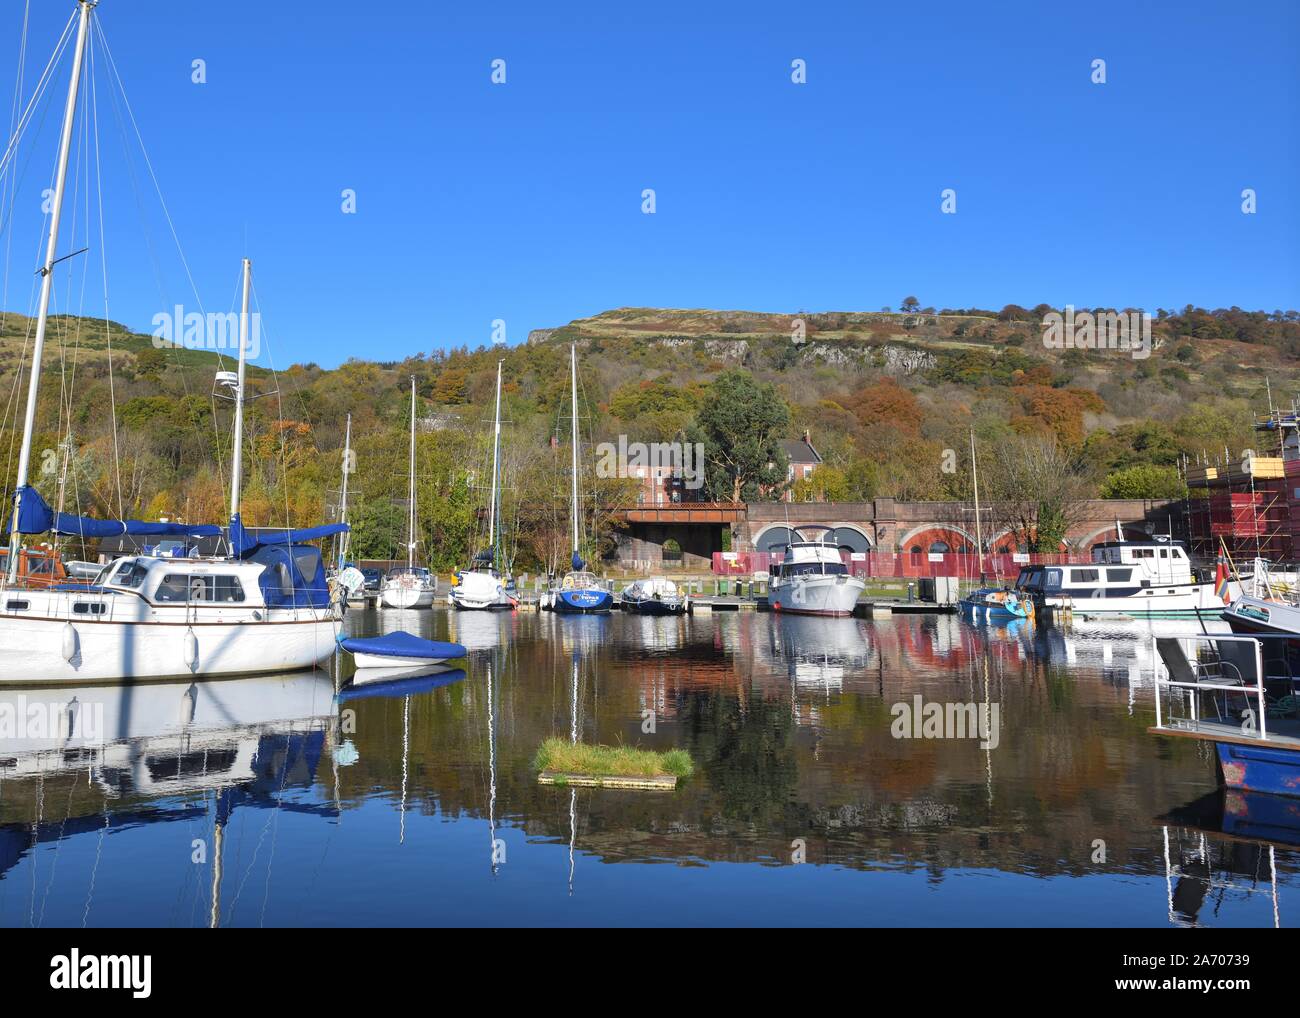 Assorted yachts and boats in Bowling Harbour at the entrance to the Forth and Clyde canal, Scotland, UK, Europe Stock Photo